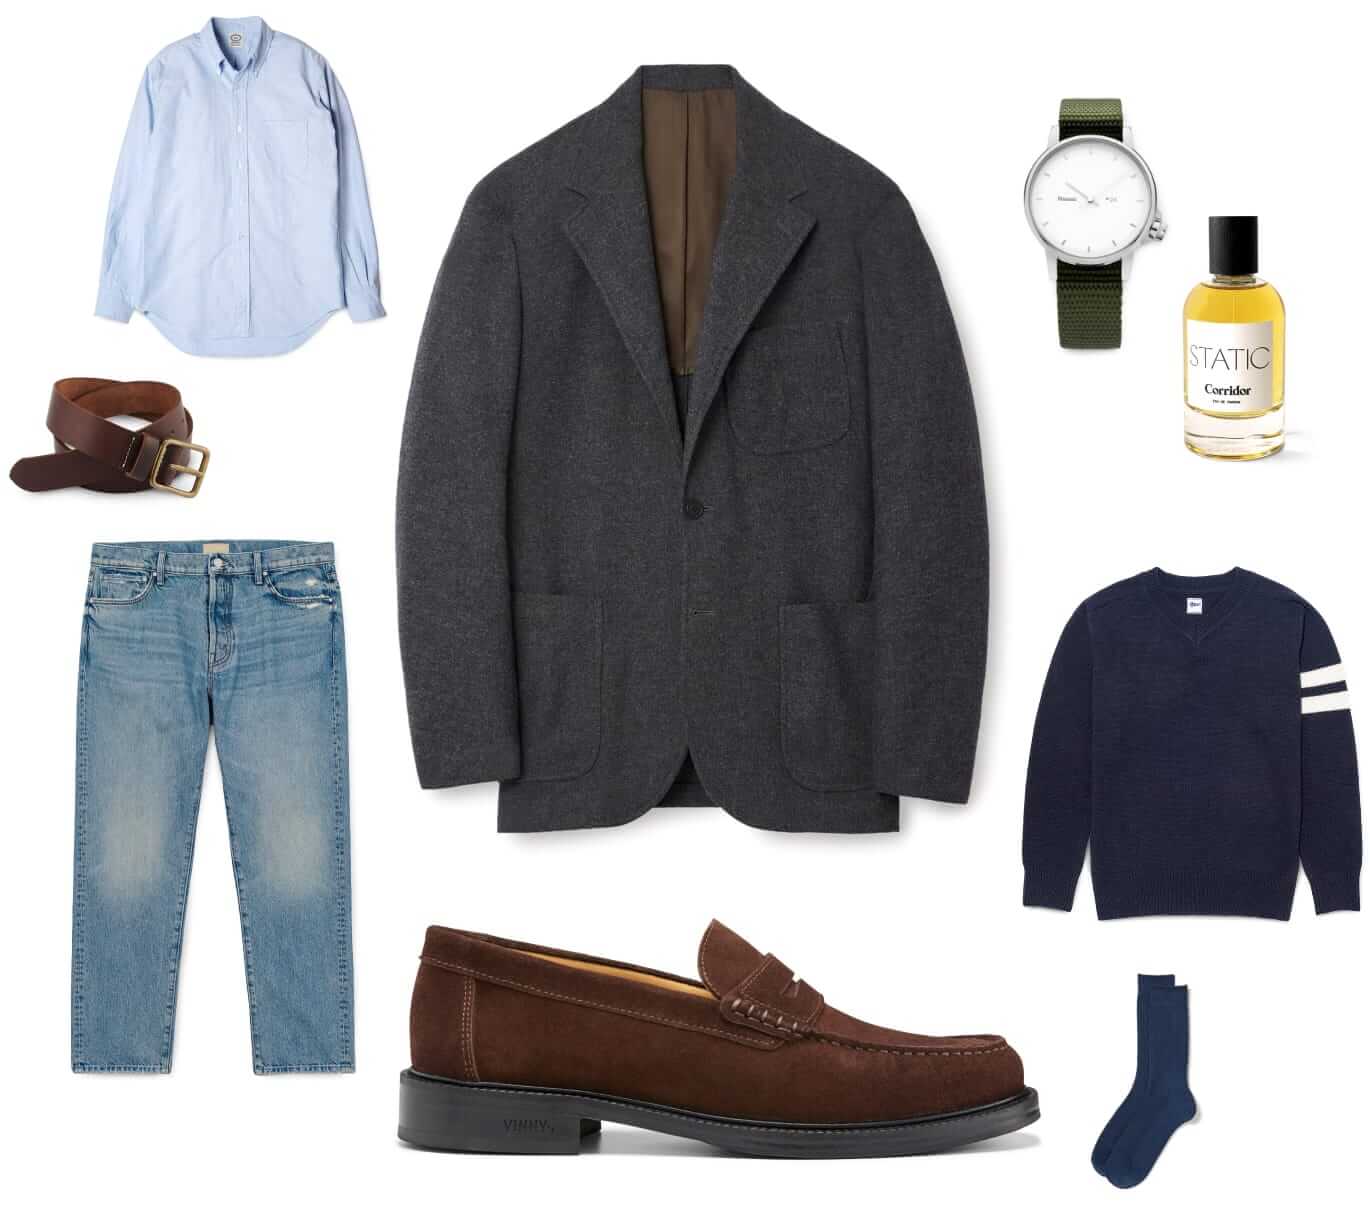 What We're Wearing: Men's Fall Date Outfit | Valet.